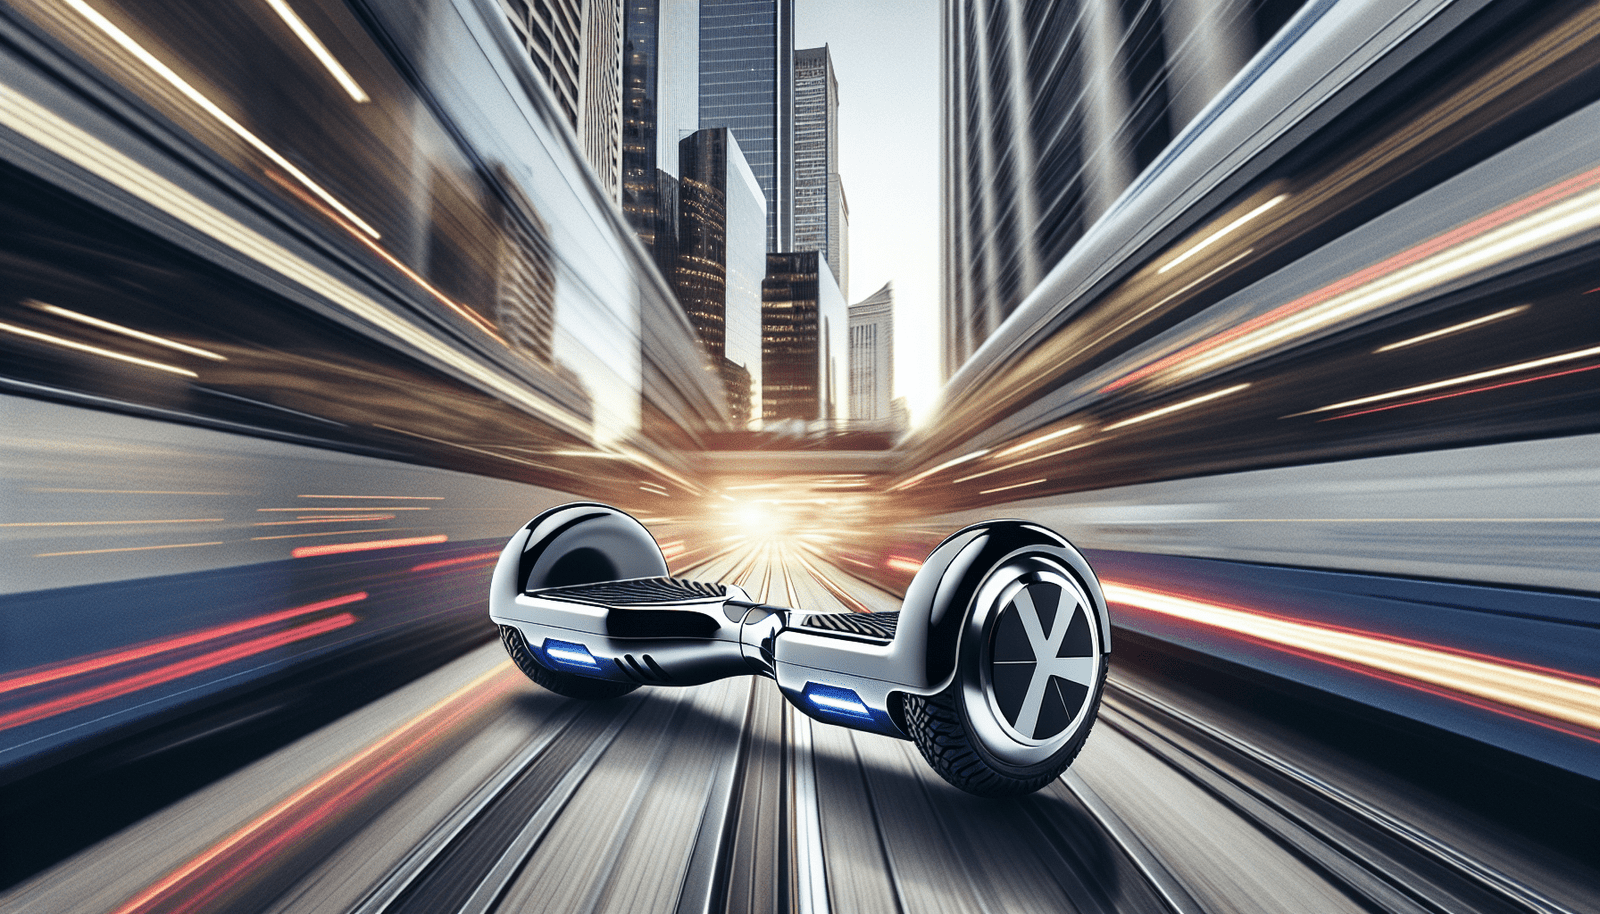 What Is The Impact Of Hoverboards On Public Transportation Systems?